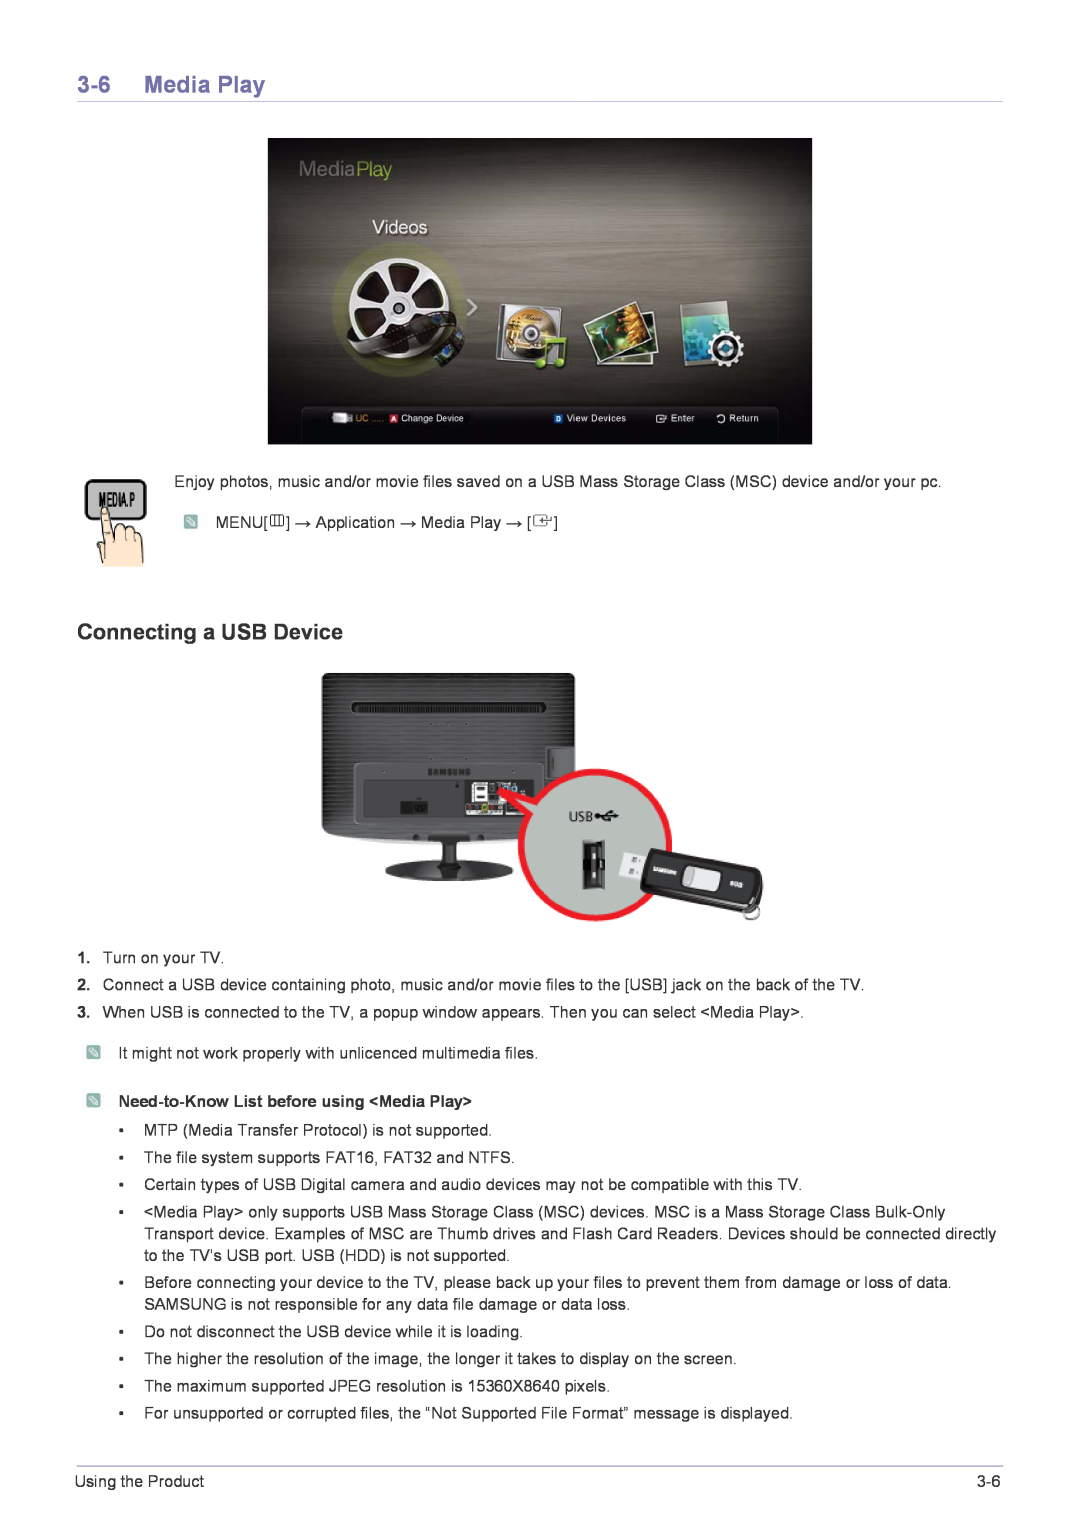 Samsung B2030HD, B2330HD, B2430HD, B1930HD, B2230HD Connecting a USB Device, Need-to-Know List before using Media Play 